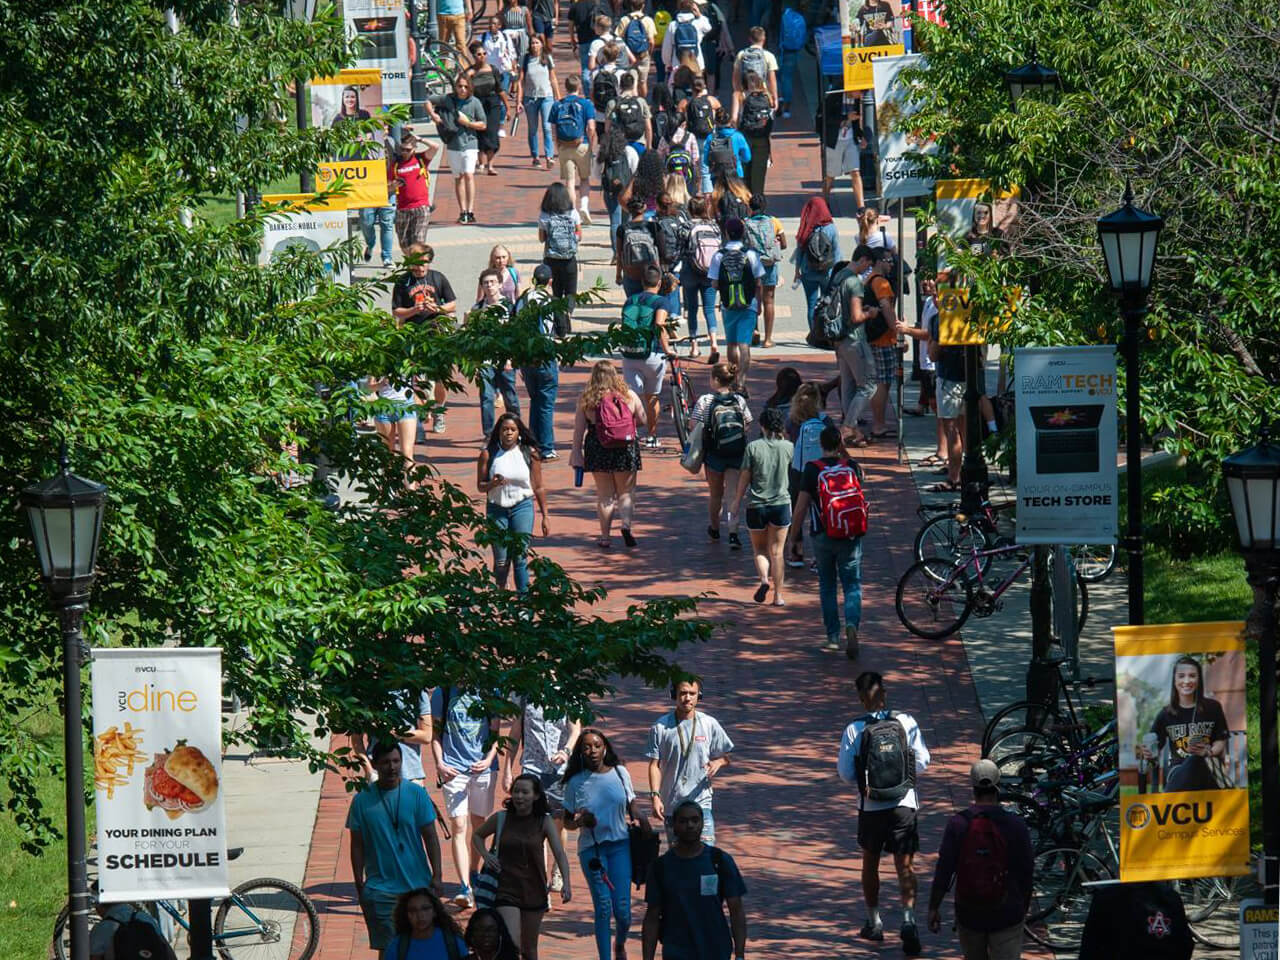 Students walking to class through the commons courtyard